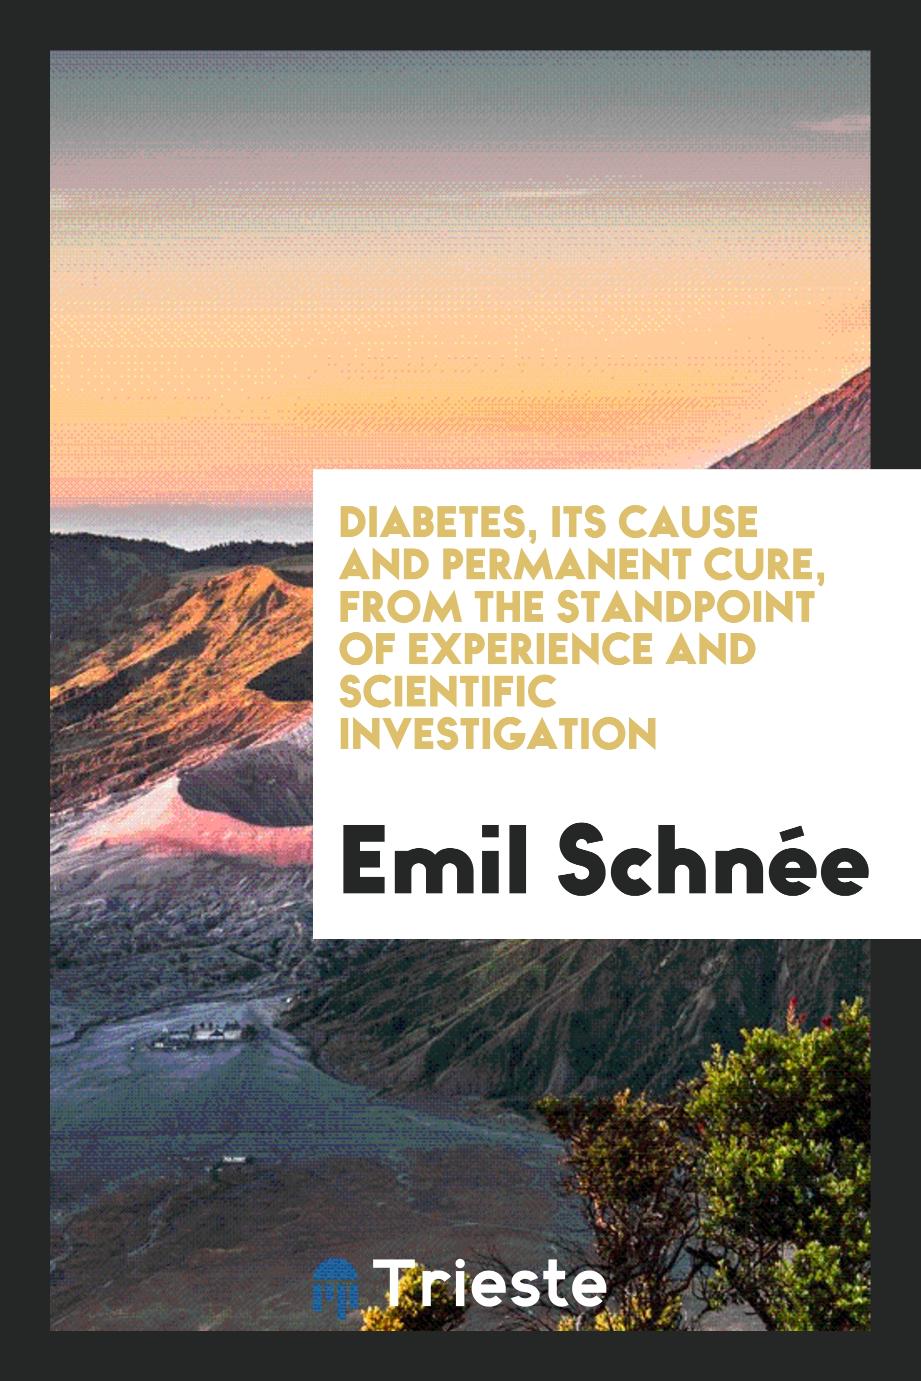 Diabetes, Its Cause and Permanent Cure, from the Standpoint of Experience and Scientific Investigation